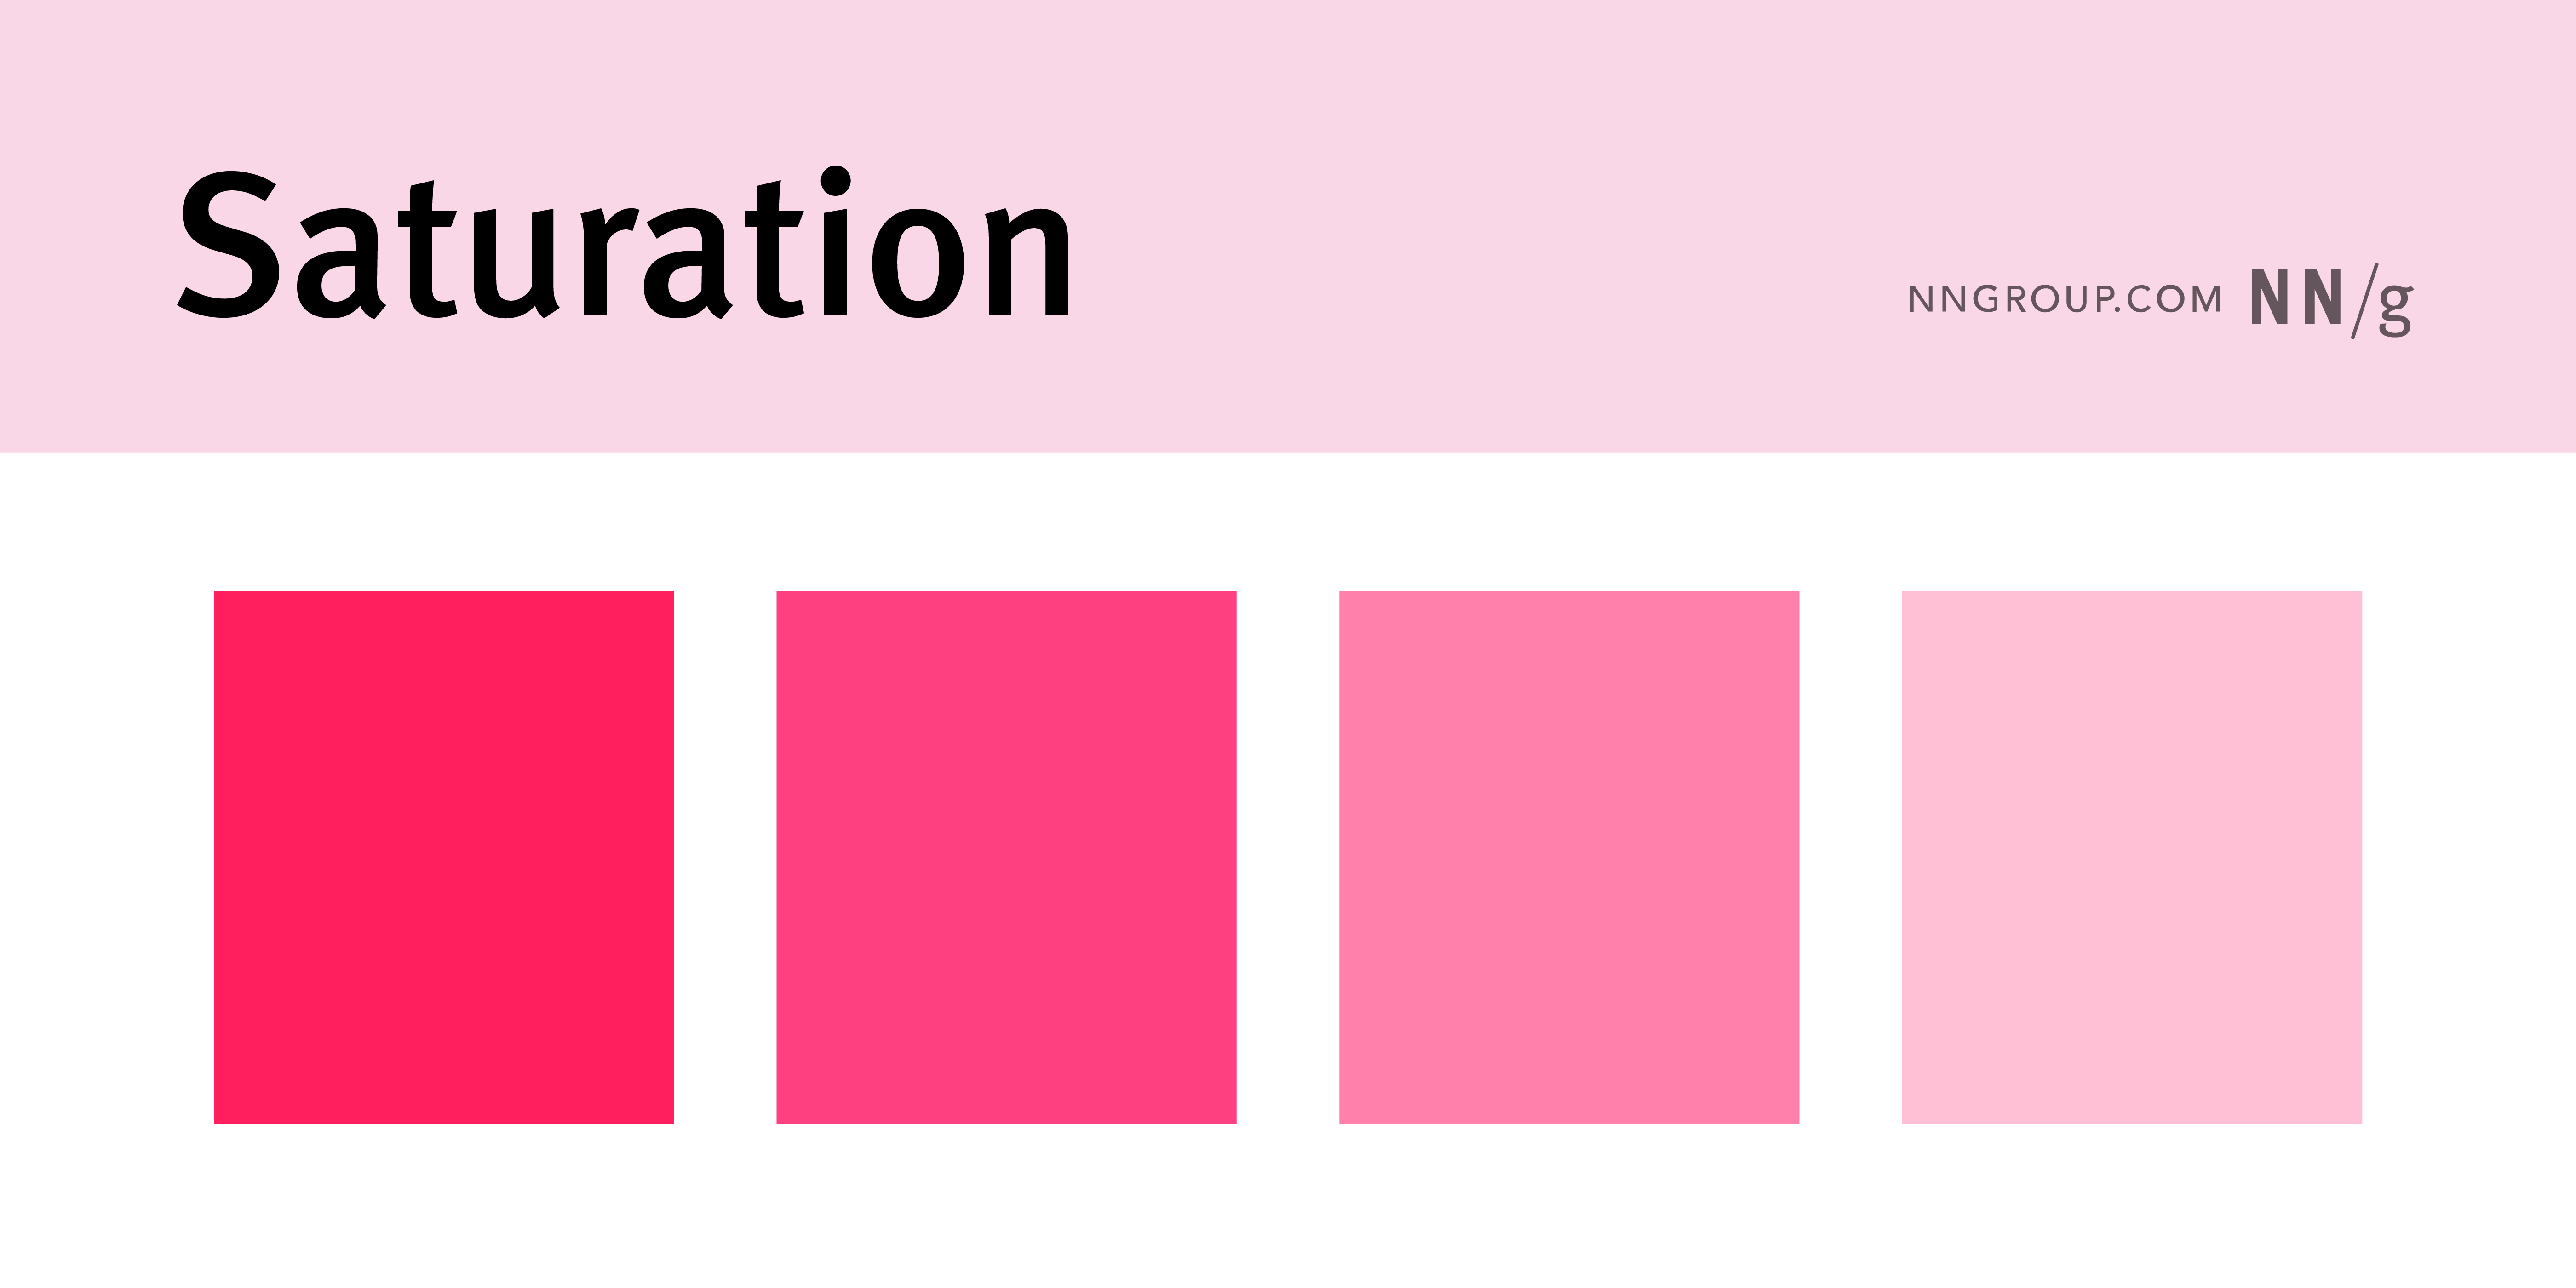 Four pink squares with varying colors, from most saturated to least